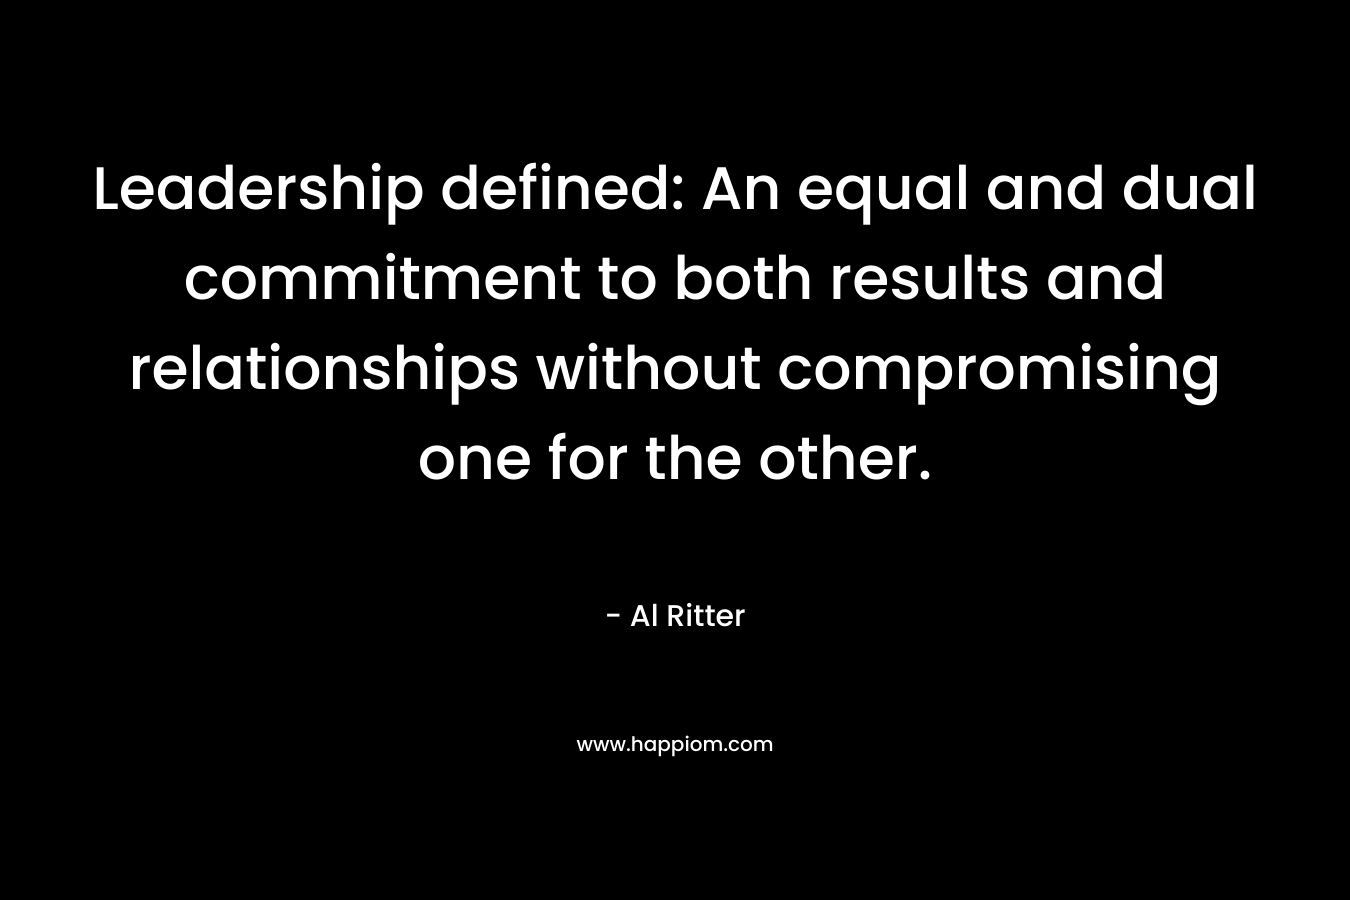 Leadership defined: An equal and dual commitment to both results and relationships without compromising one for the other. – Al Ritter